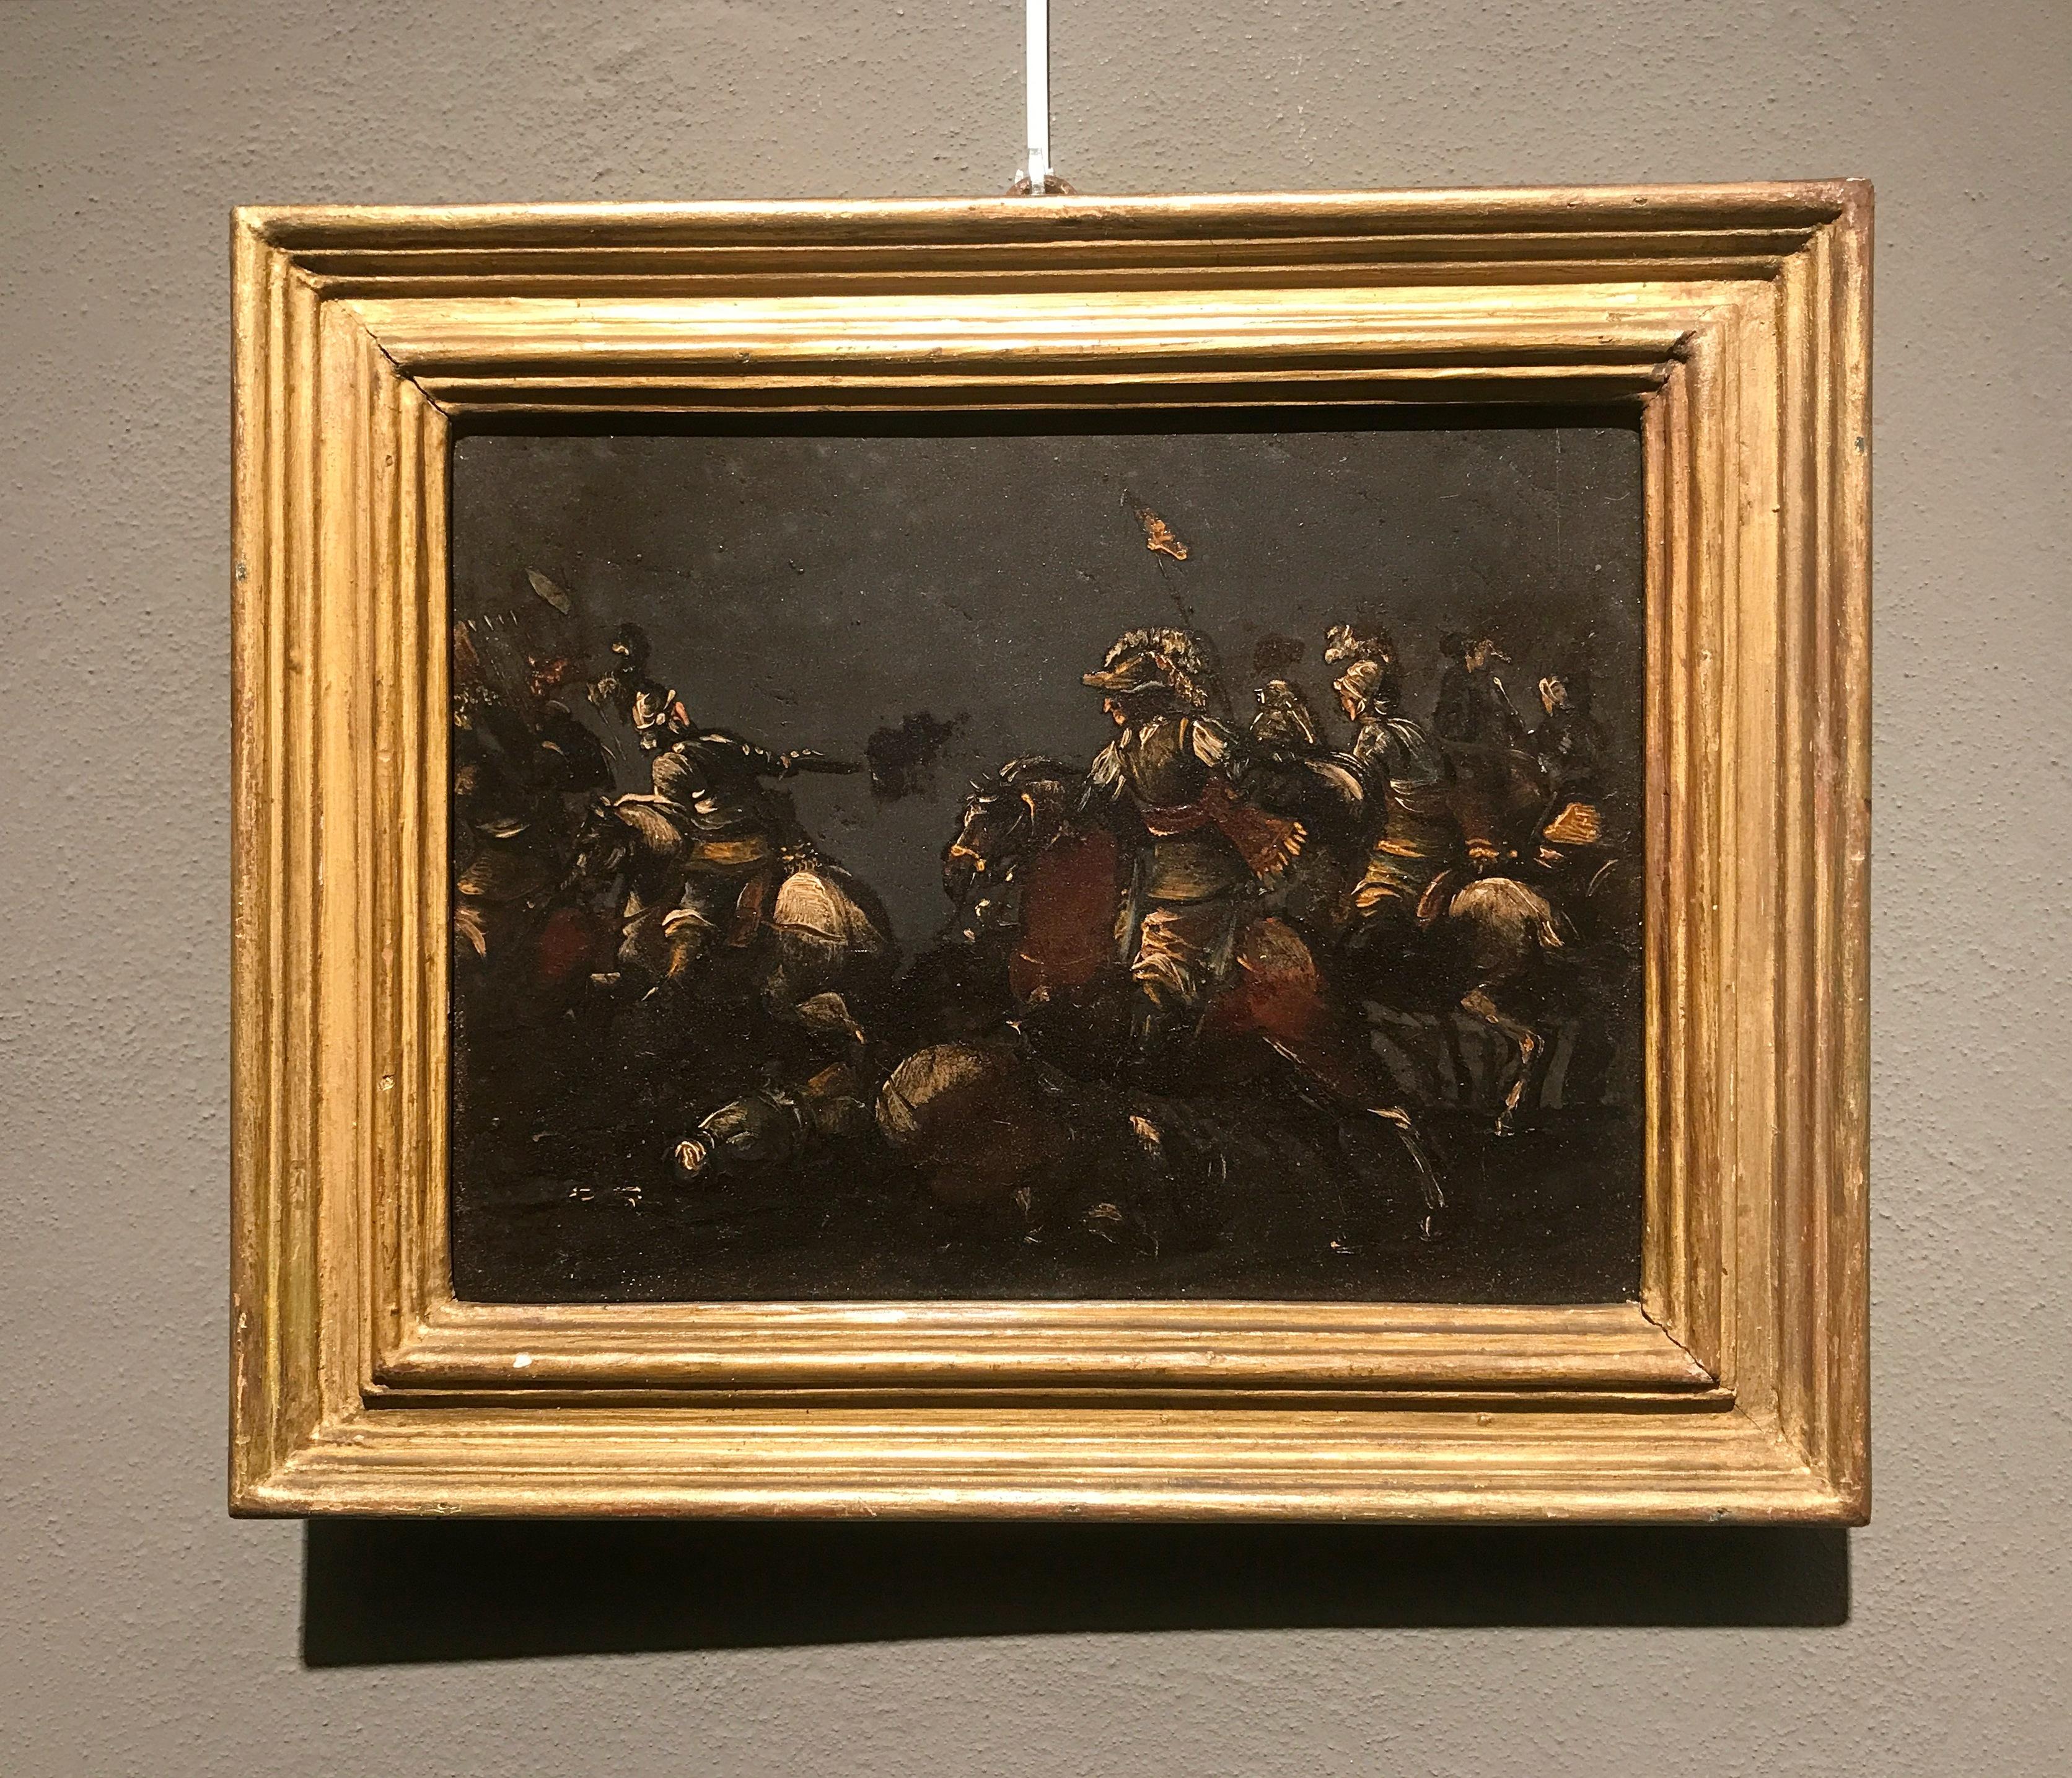 17th century, Italian oil on slate painting with A Cavalry battle scene 

Size: Frame: cm H 24 x L 30 x P 2; slate: cm 17x 5 x 23.5

The painting depicts a dynamic cavalry battle. At the center a rider with a feathered helmet advances making his